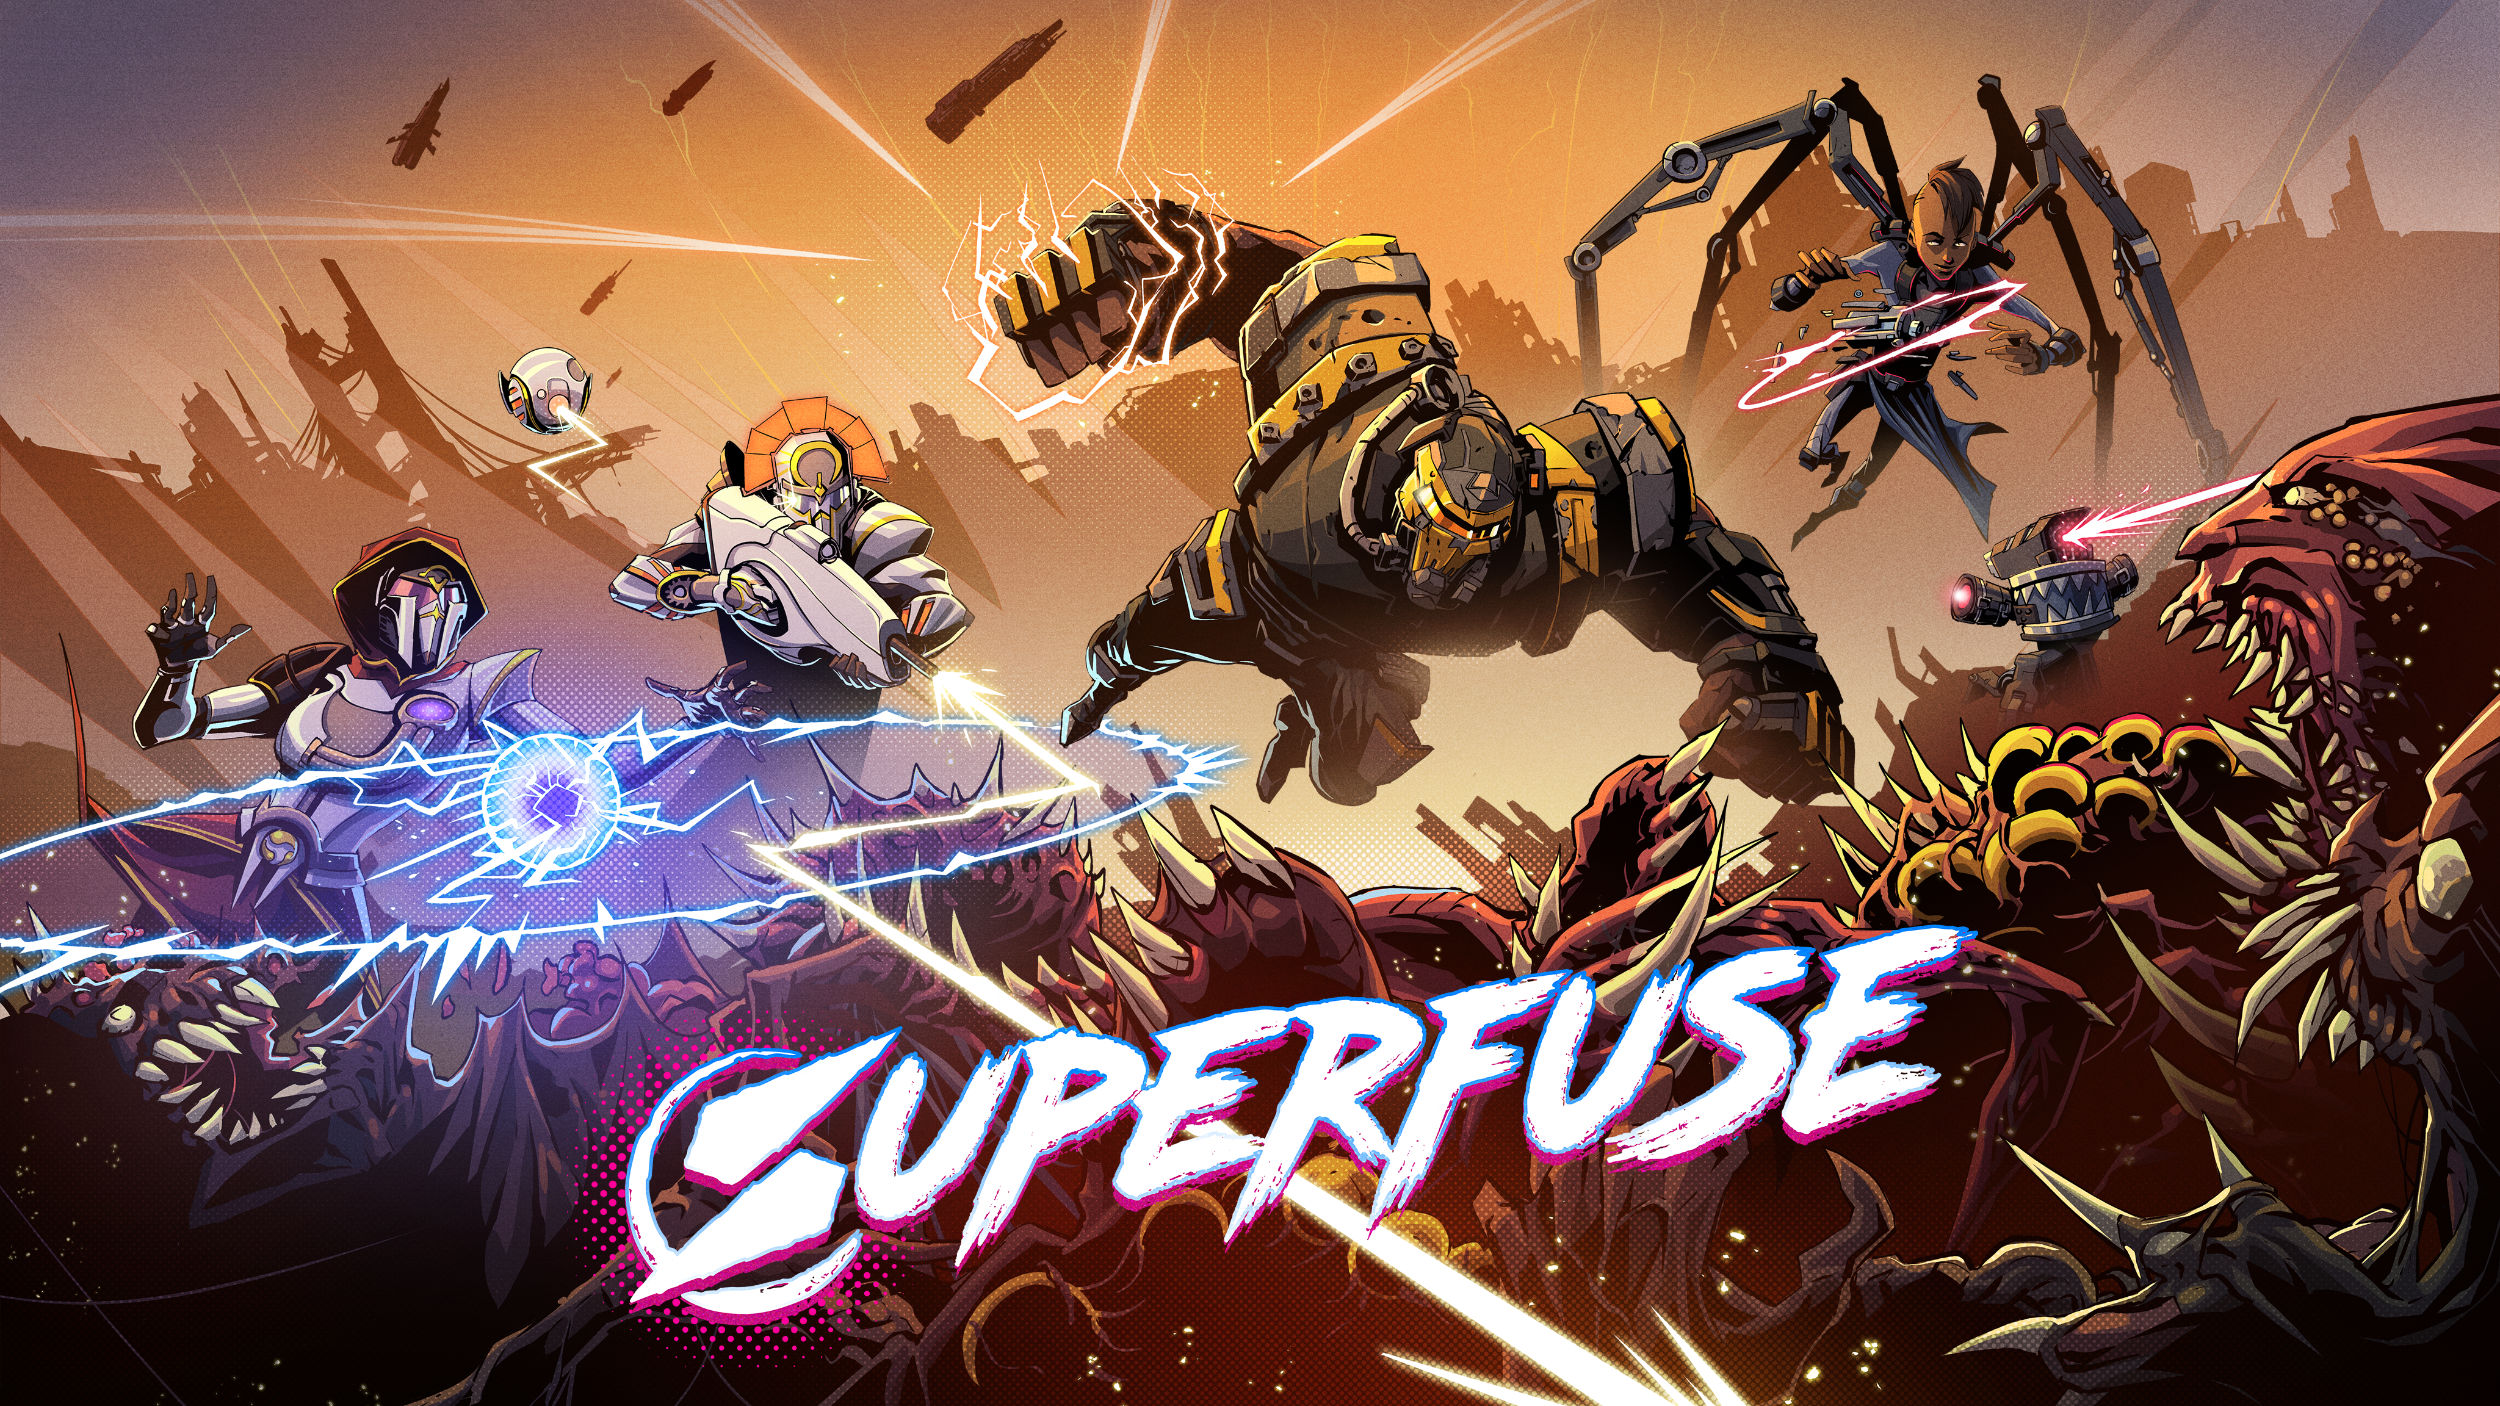 Superfuse artwork of a squad of four armor-clad superheroes plunging into battle with alien-like beasts against a silhouetted city backdrop.